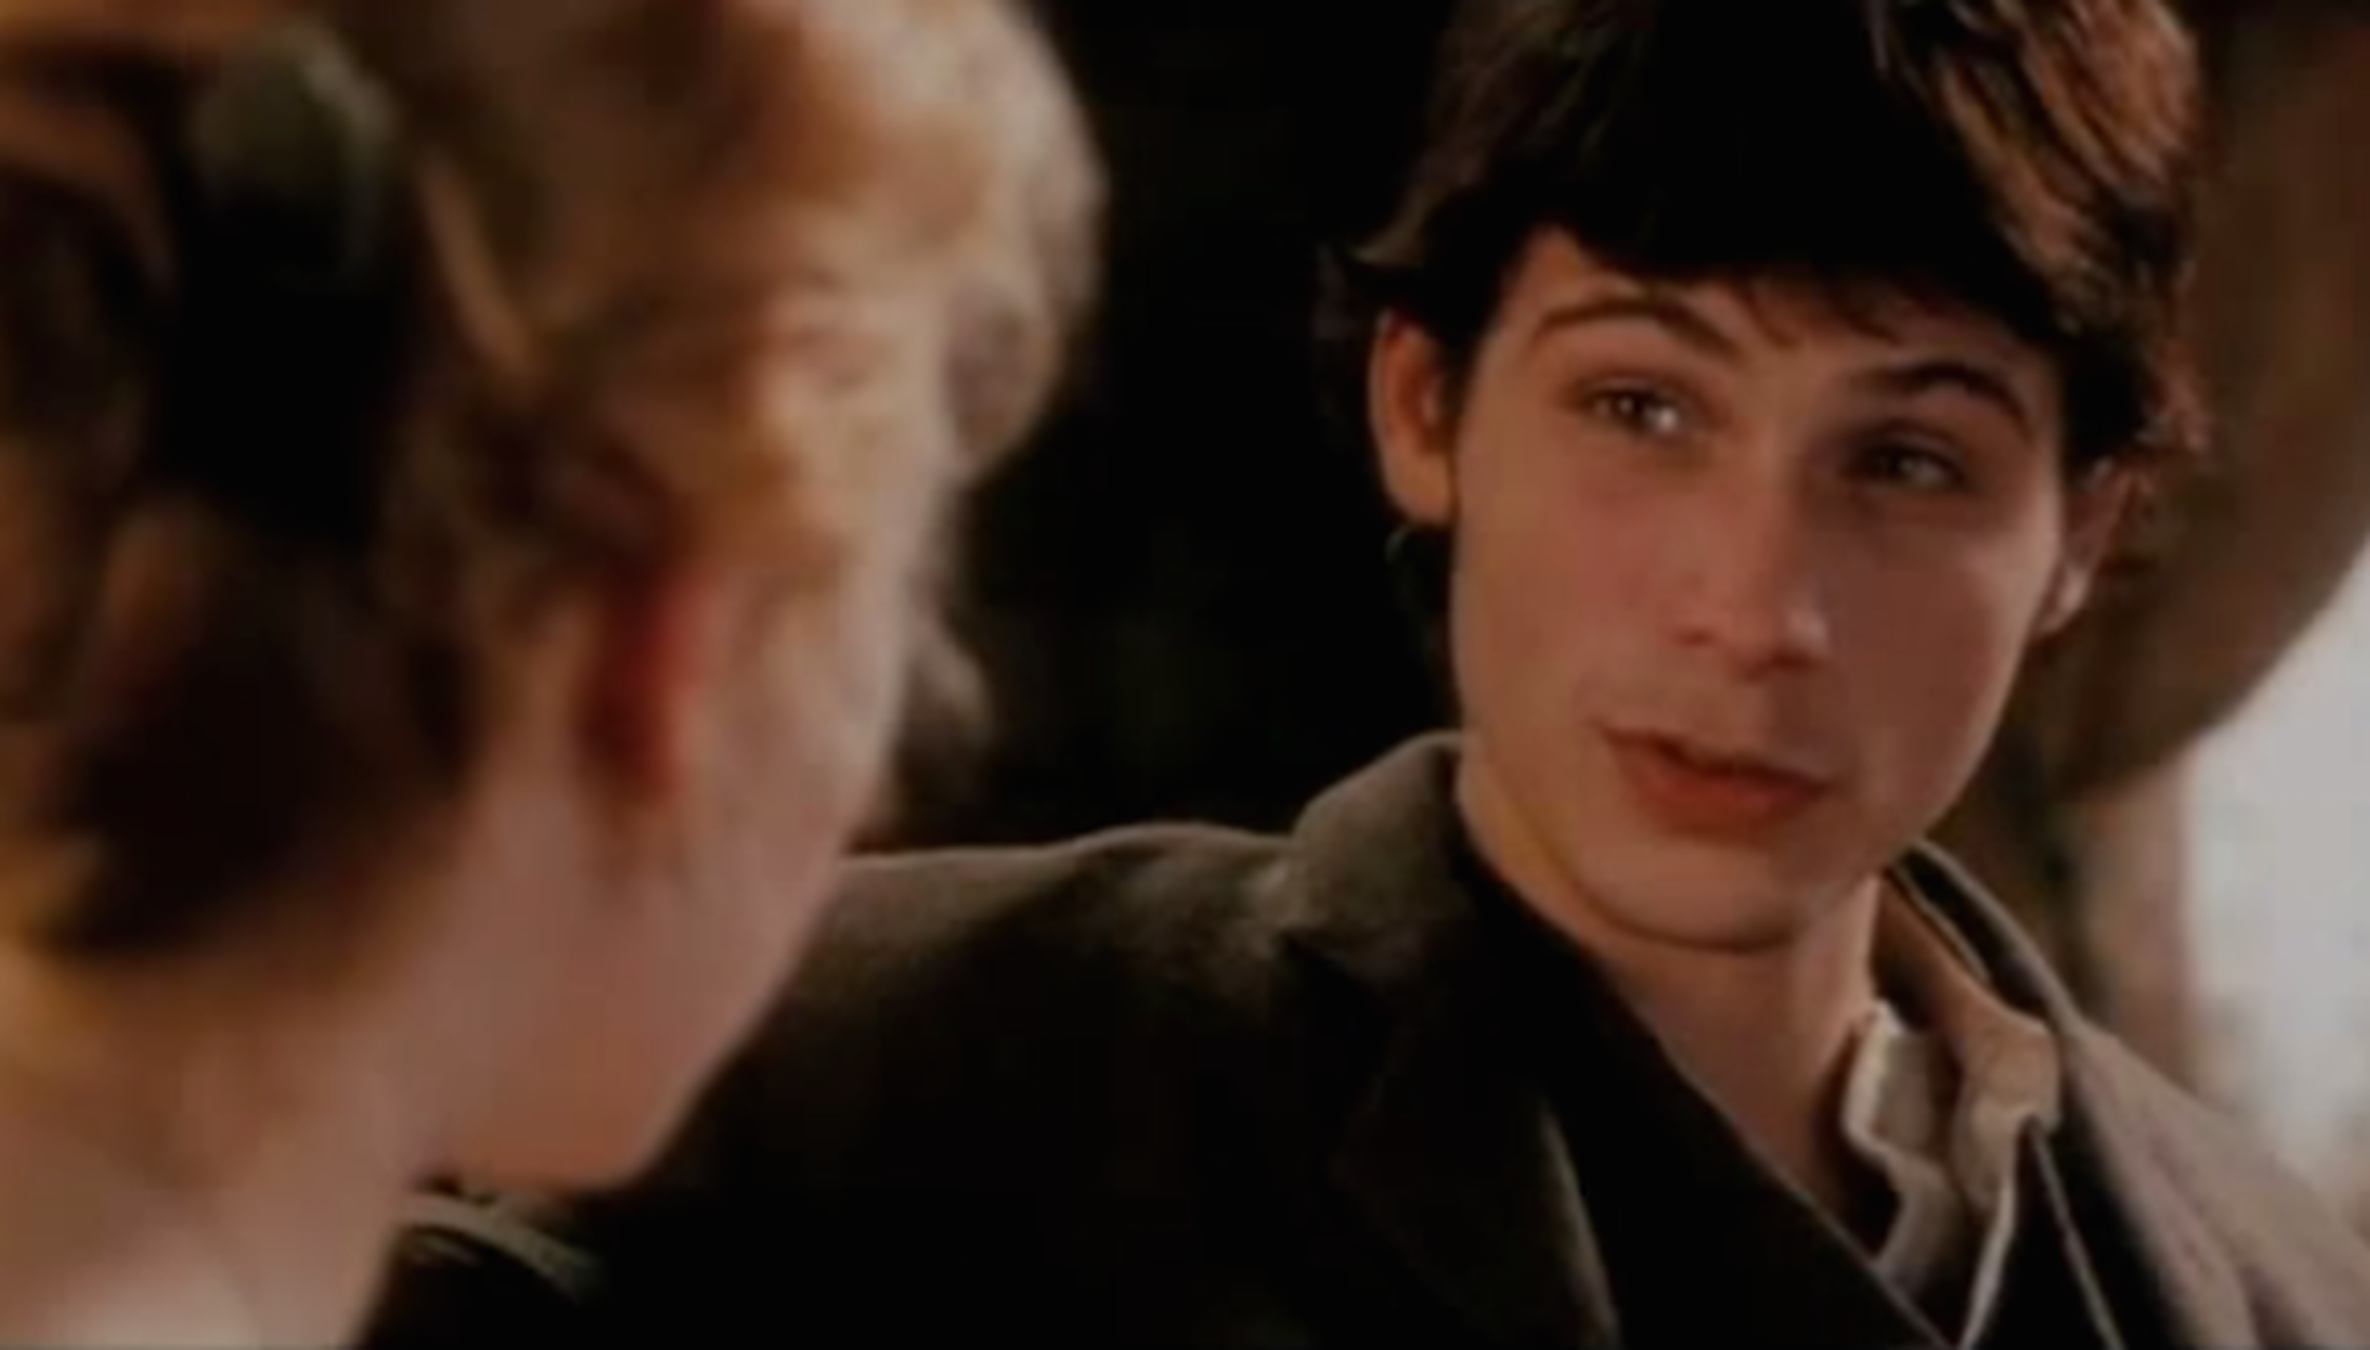 WATCH: Kate Winslet and Jeremy Sisto's 'Titanic' Screen Test